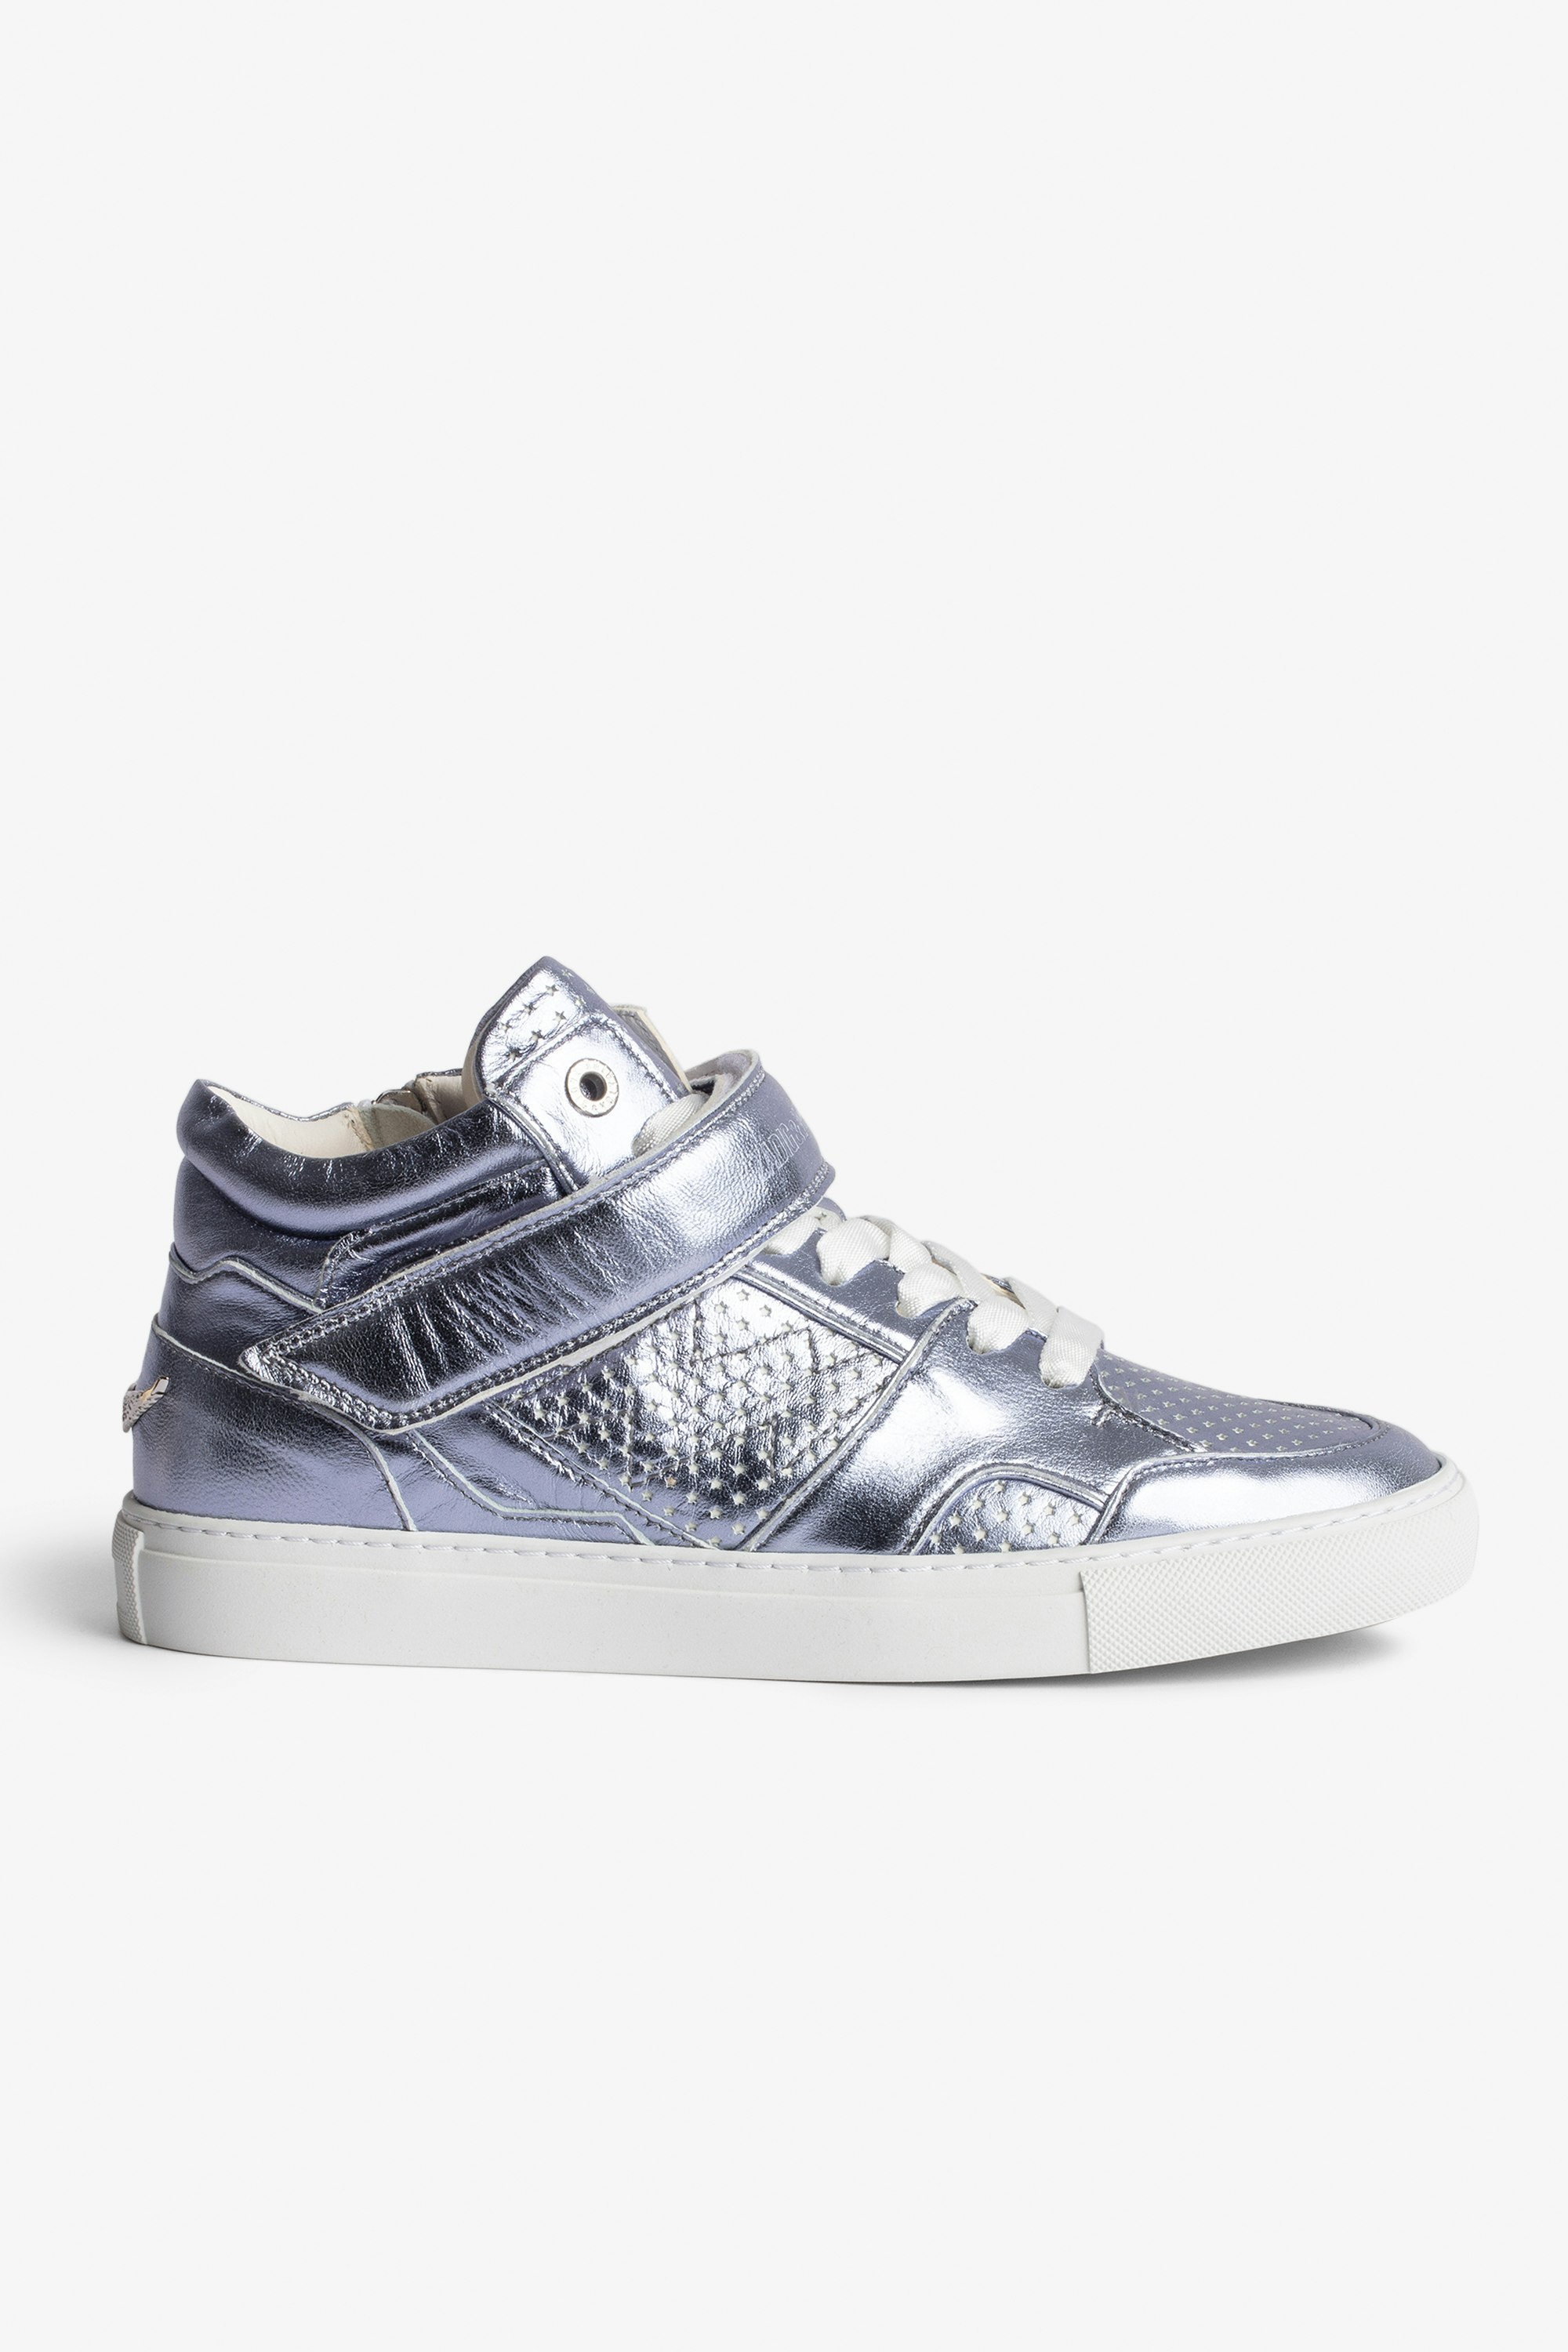 ZV1747 Mid Flash trainers Women’s mid-top trainers in purple metallic leather featuring perforated stars